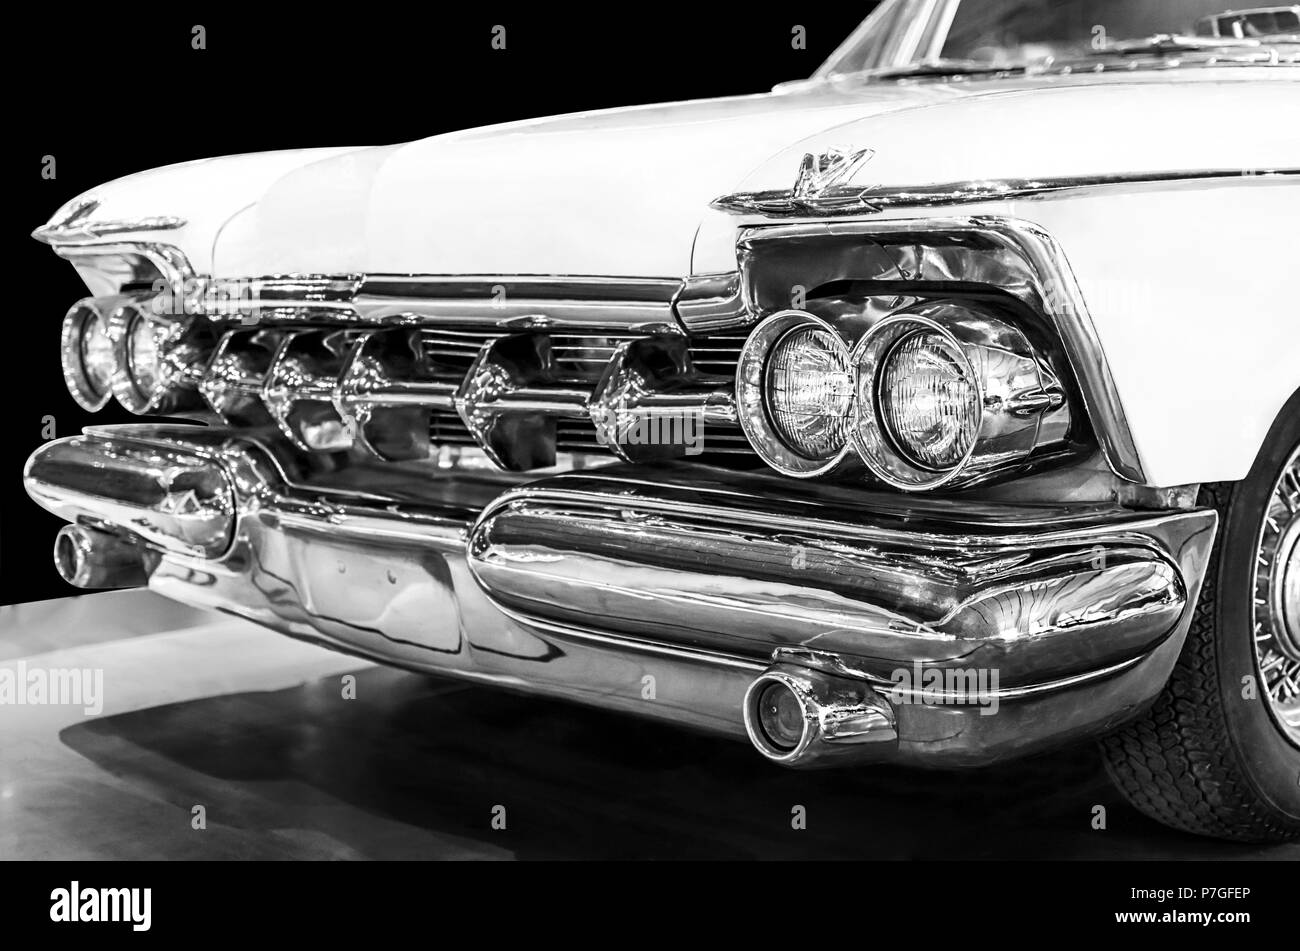 Chrysler Imperial Crown 1959 in black and white. Selective focus on the right headlights. Isolated on black background Stock Photo